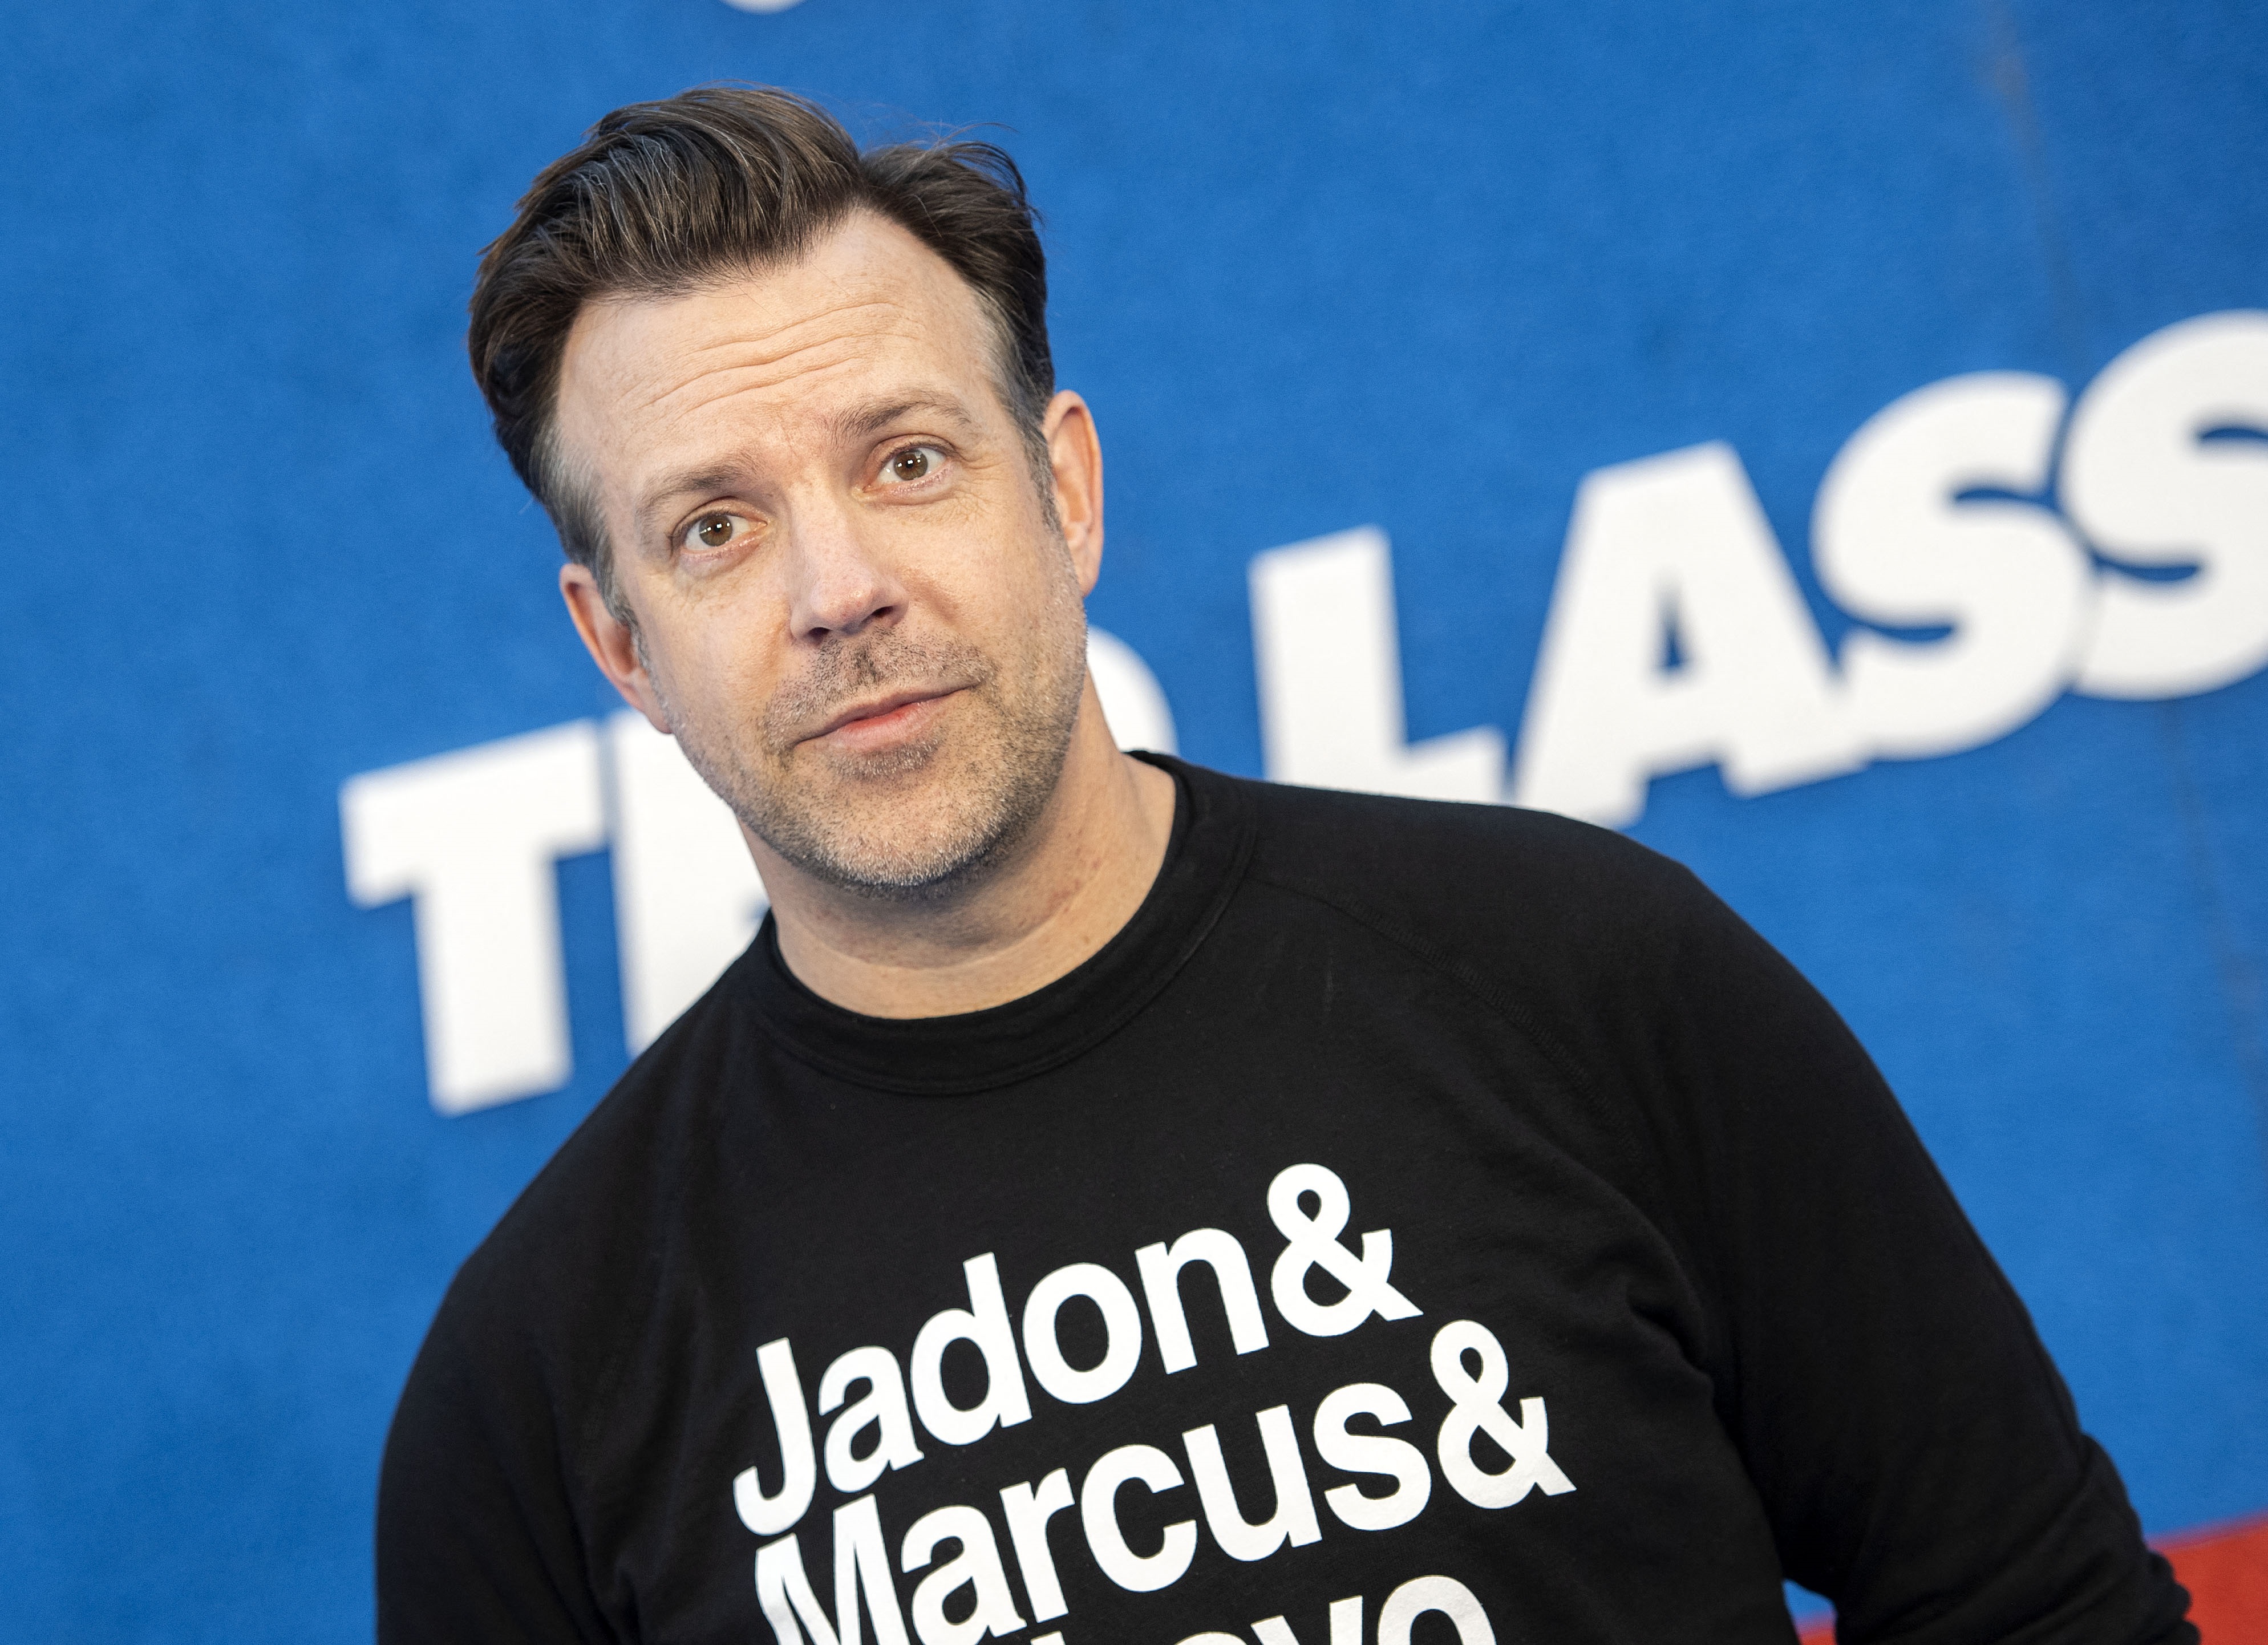 Jason Sudeikis in Ted Lasso up for 4 Emmy Awards in 2021